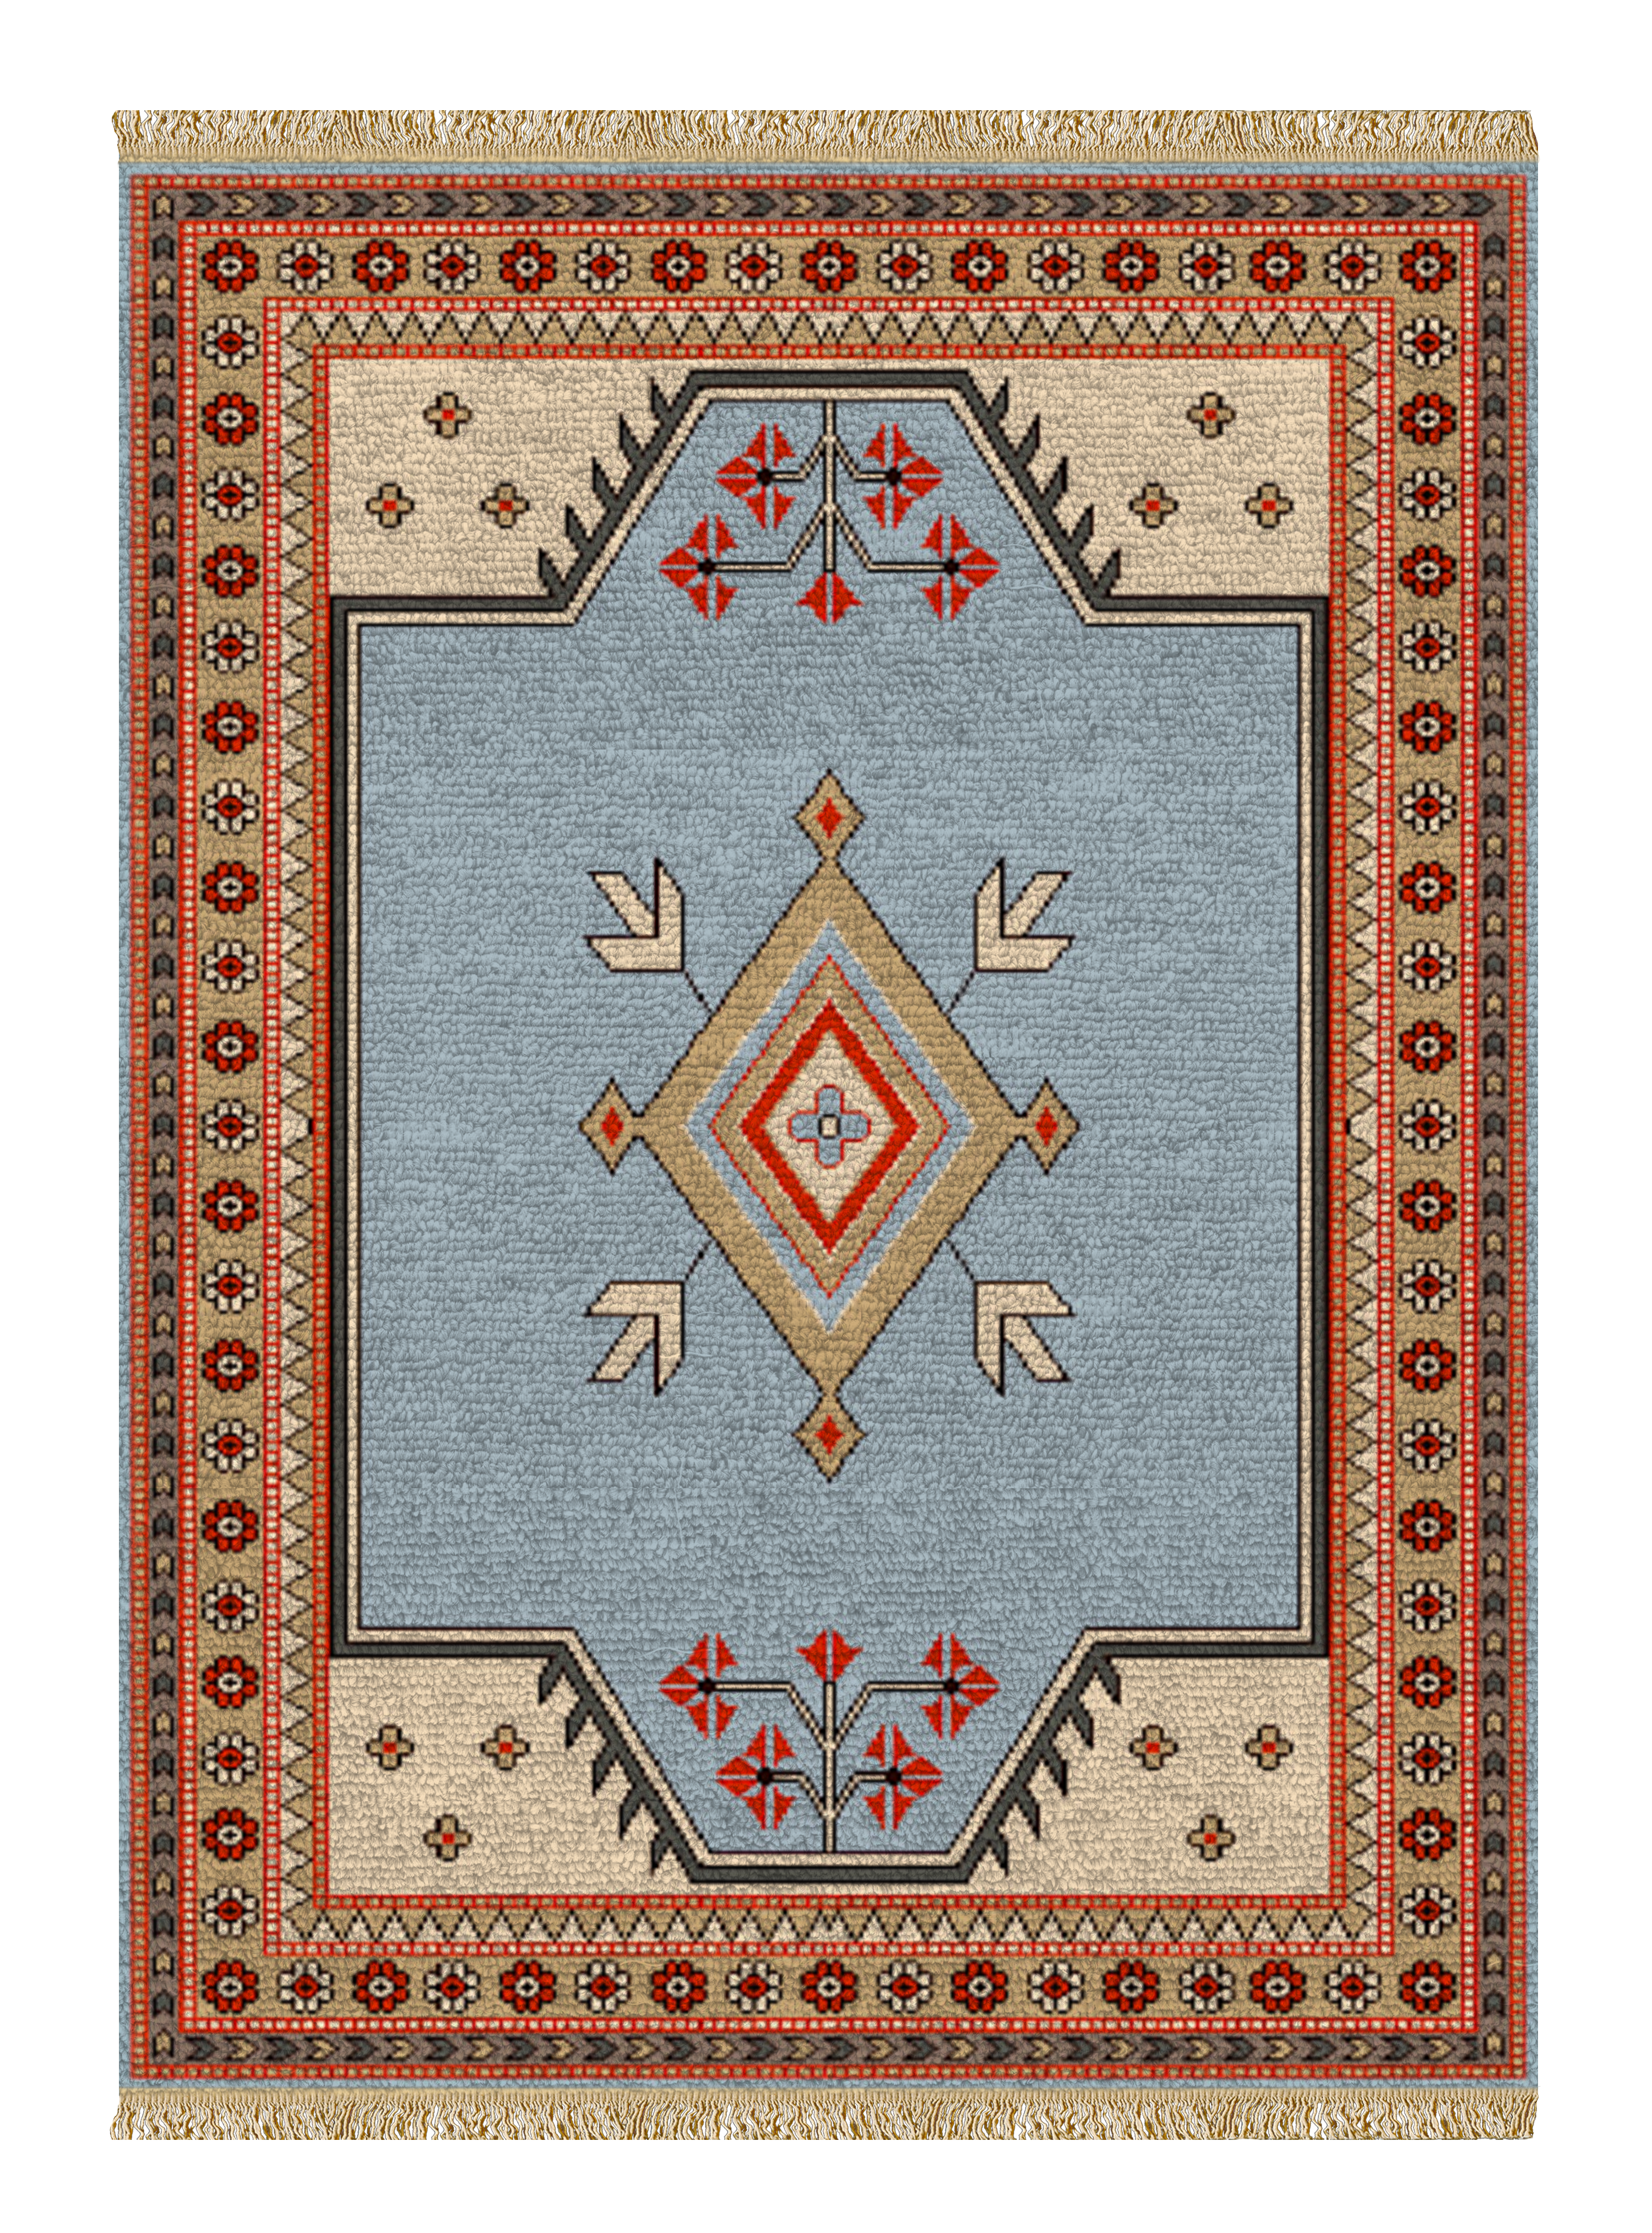 High Quality Area Rugs: Tips for Maximizing Durability and Comfort